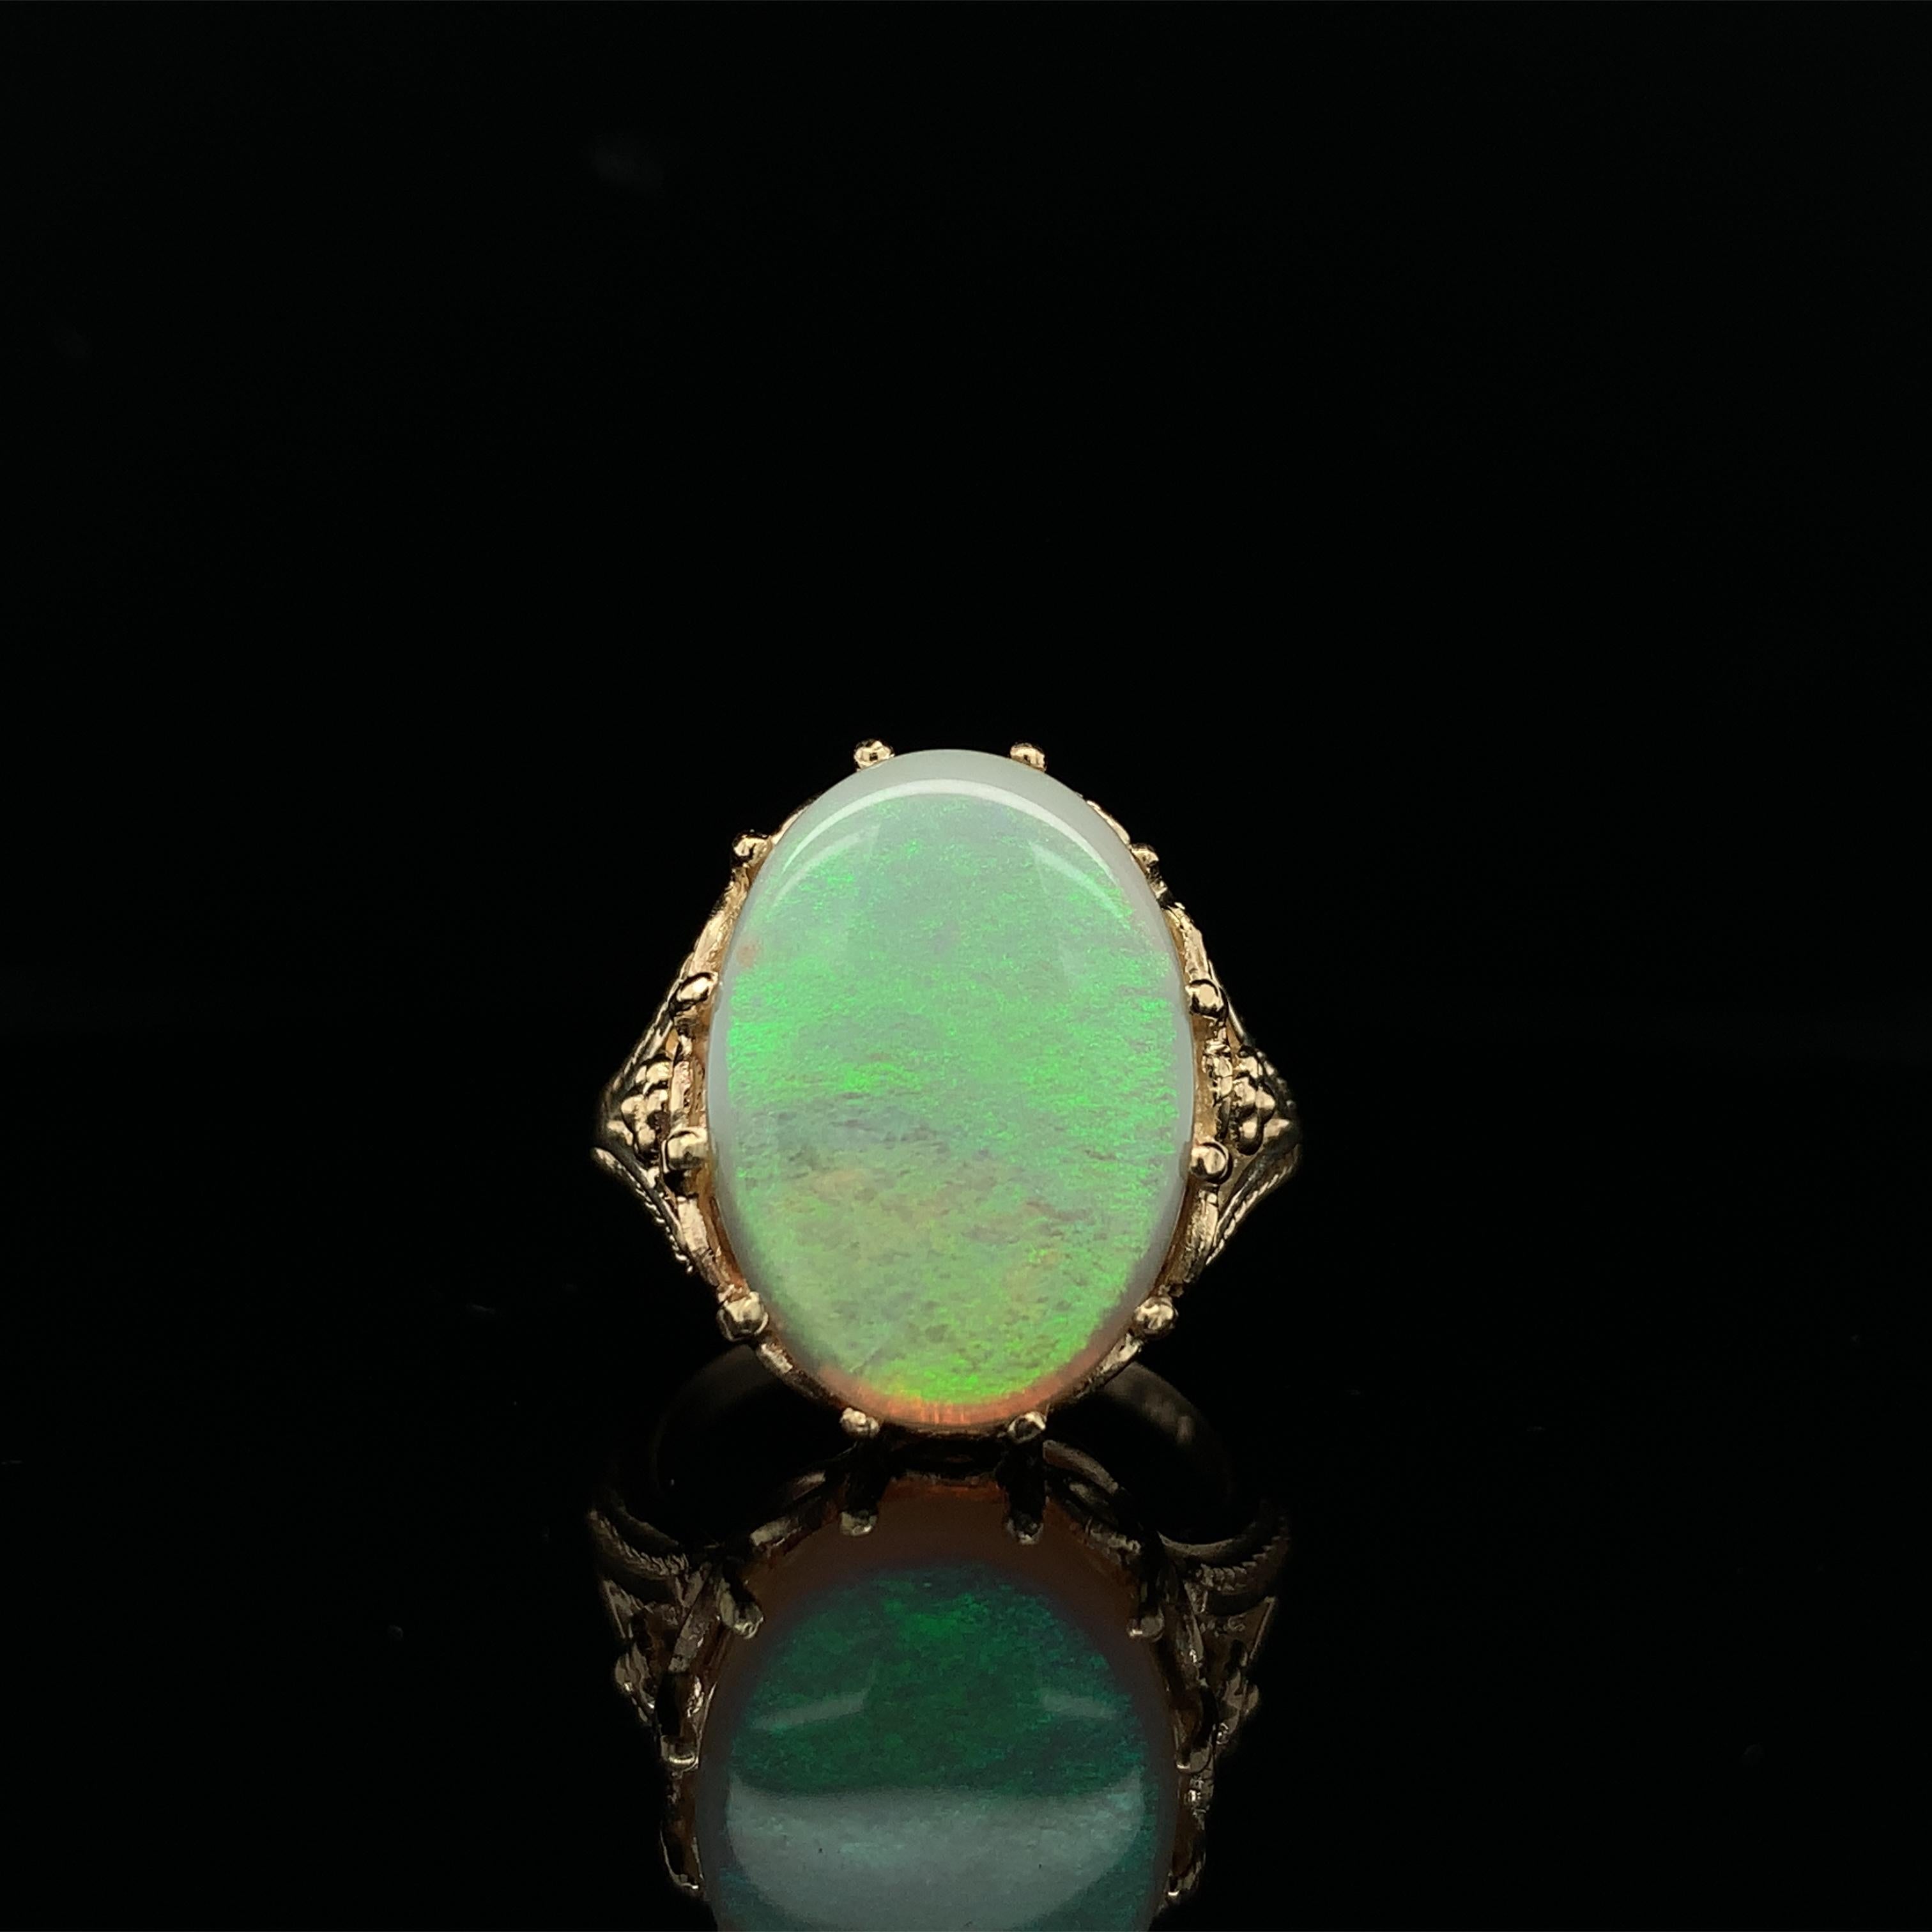 14K yellow gold ring featuring an oval Australian opal weighing 5.86 carats and measuring about 18mm x 12.8mm. The opal has primarily green pin-fire play of color with a little yellow. This opal is freshly polished and has a ton of color. The ring